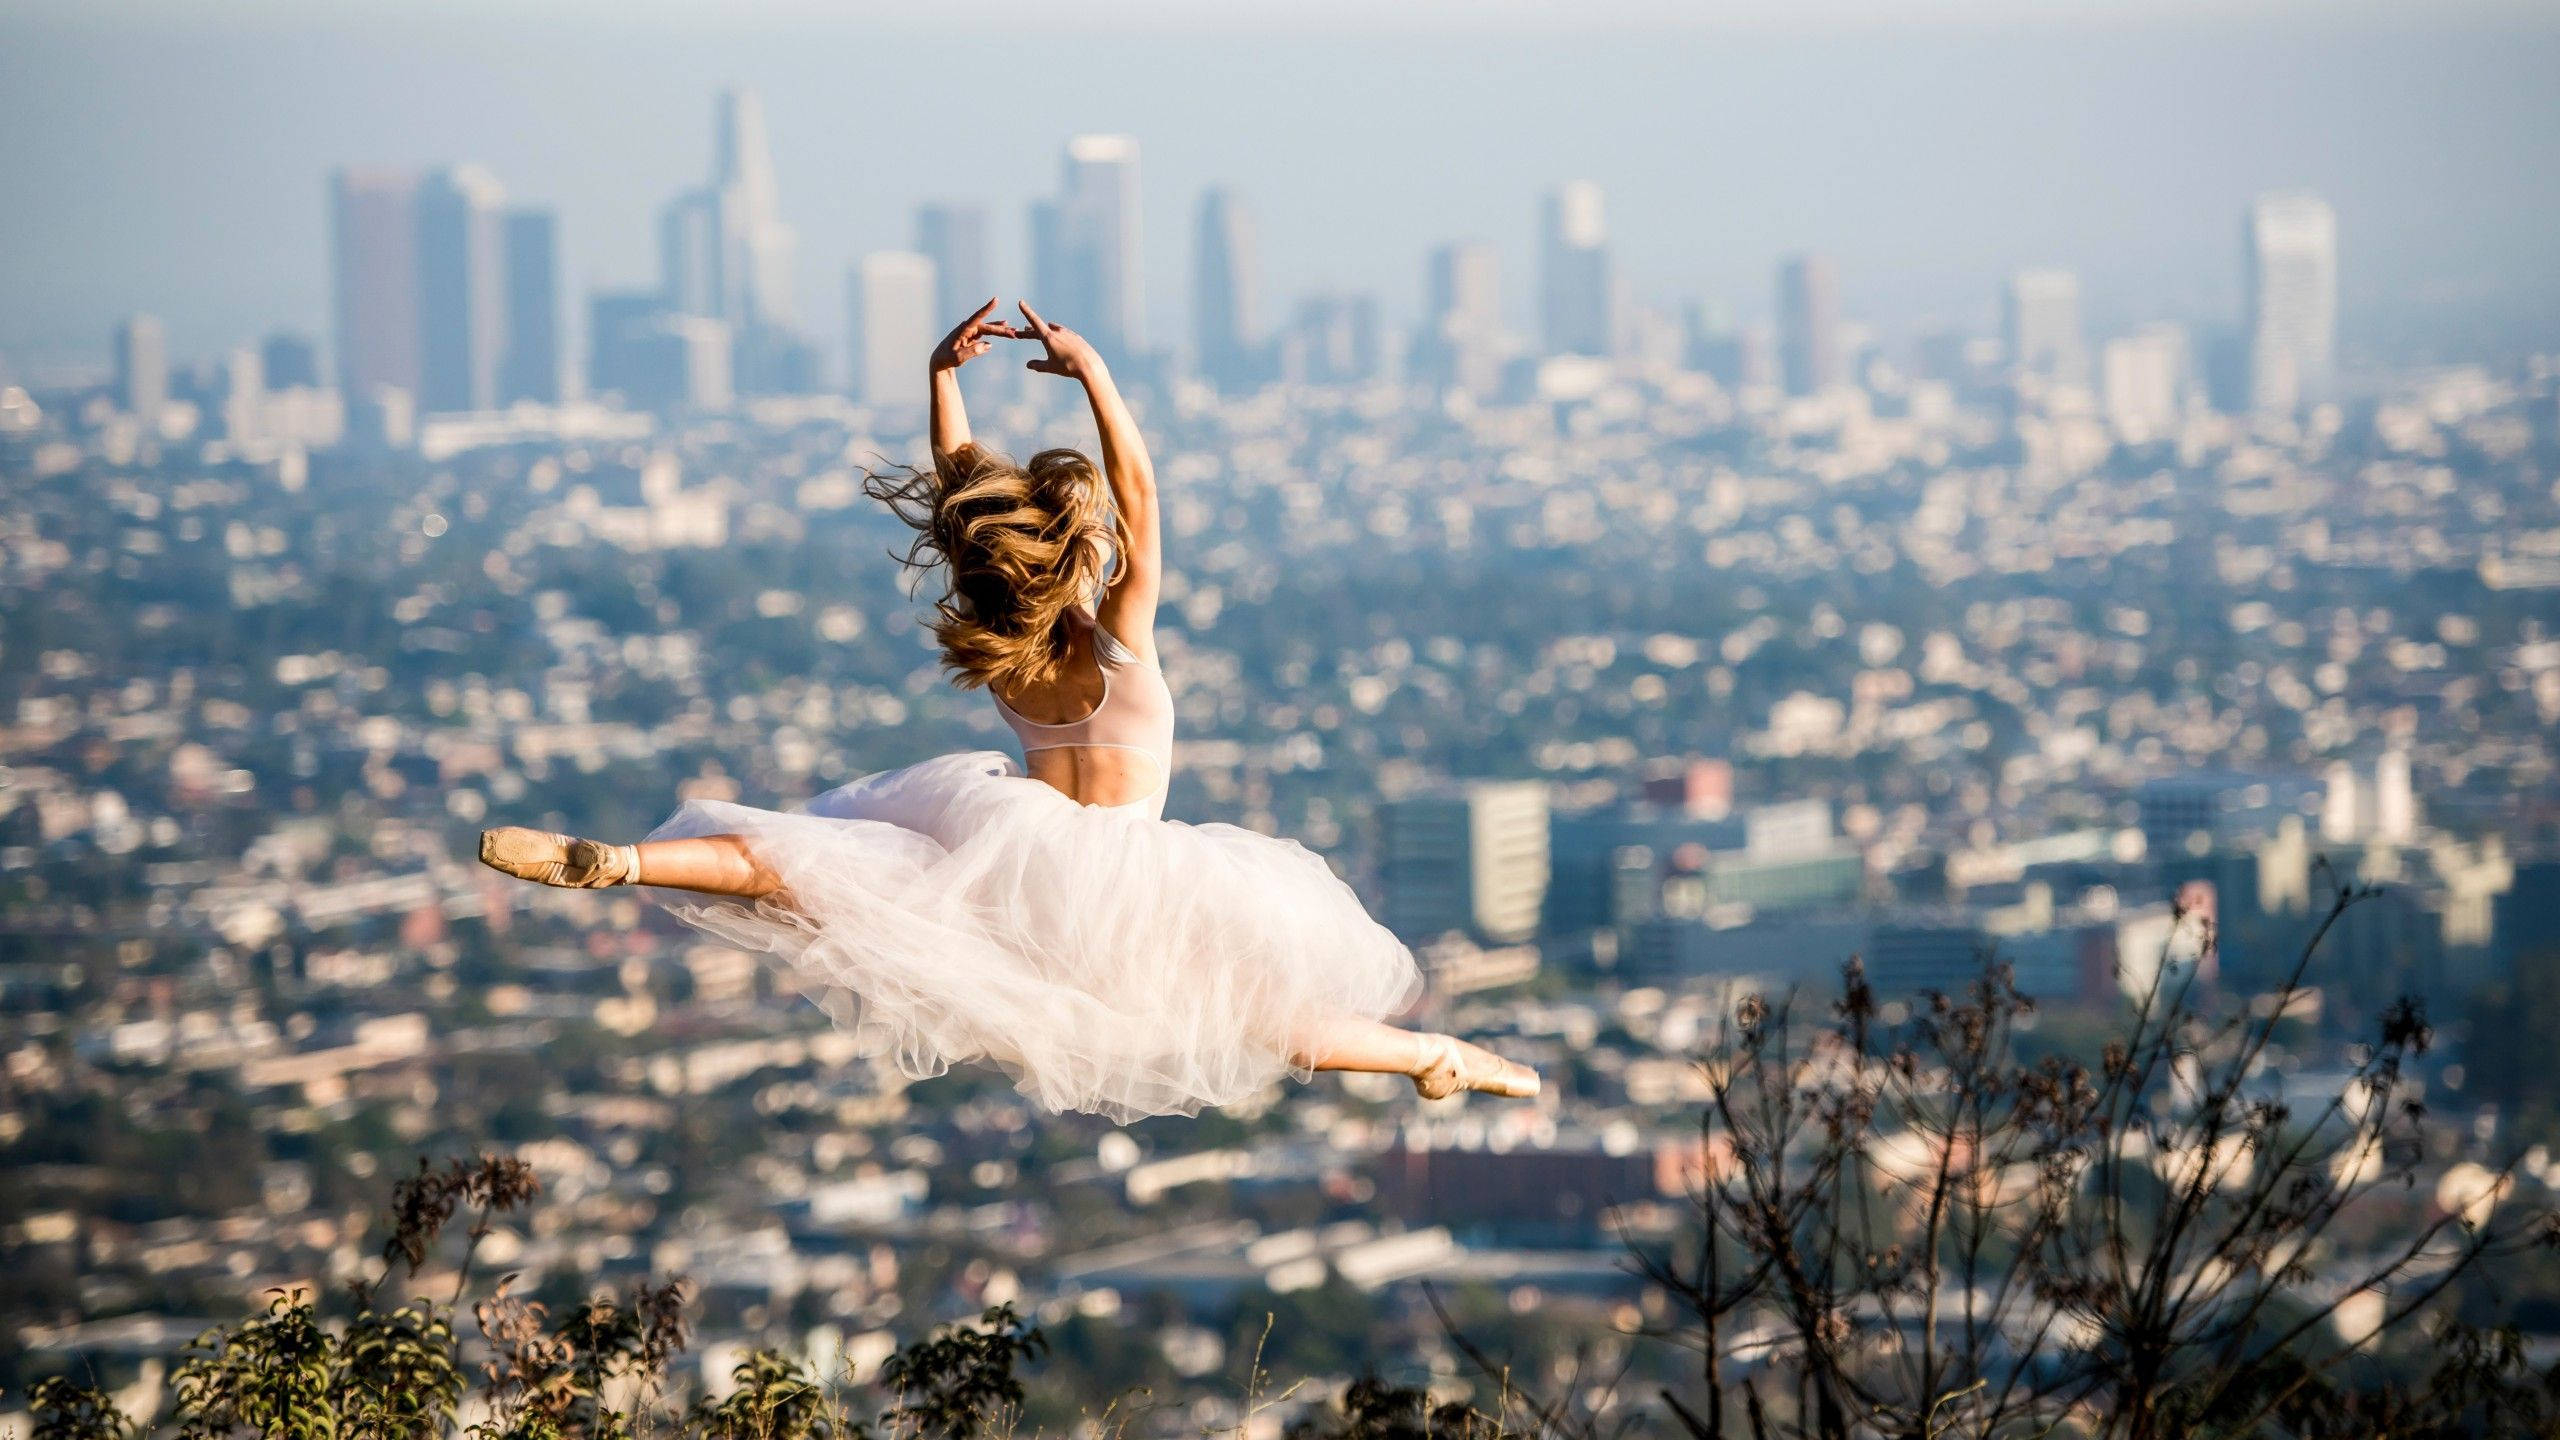 2560x1440 Download Ballet Dancer With City Overview Wallpaper